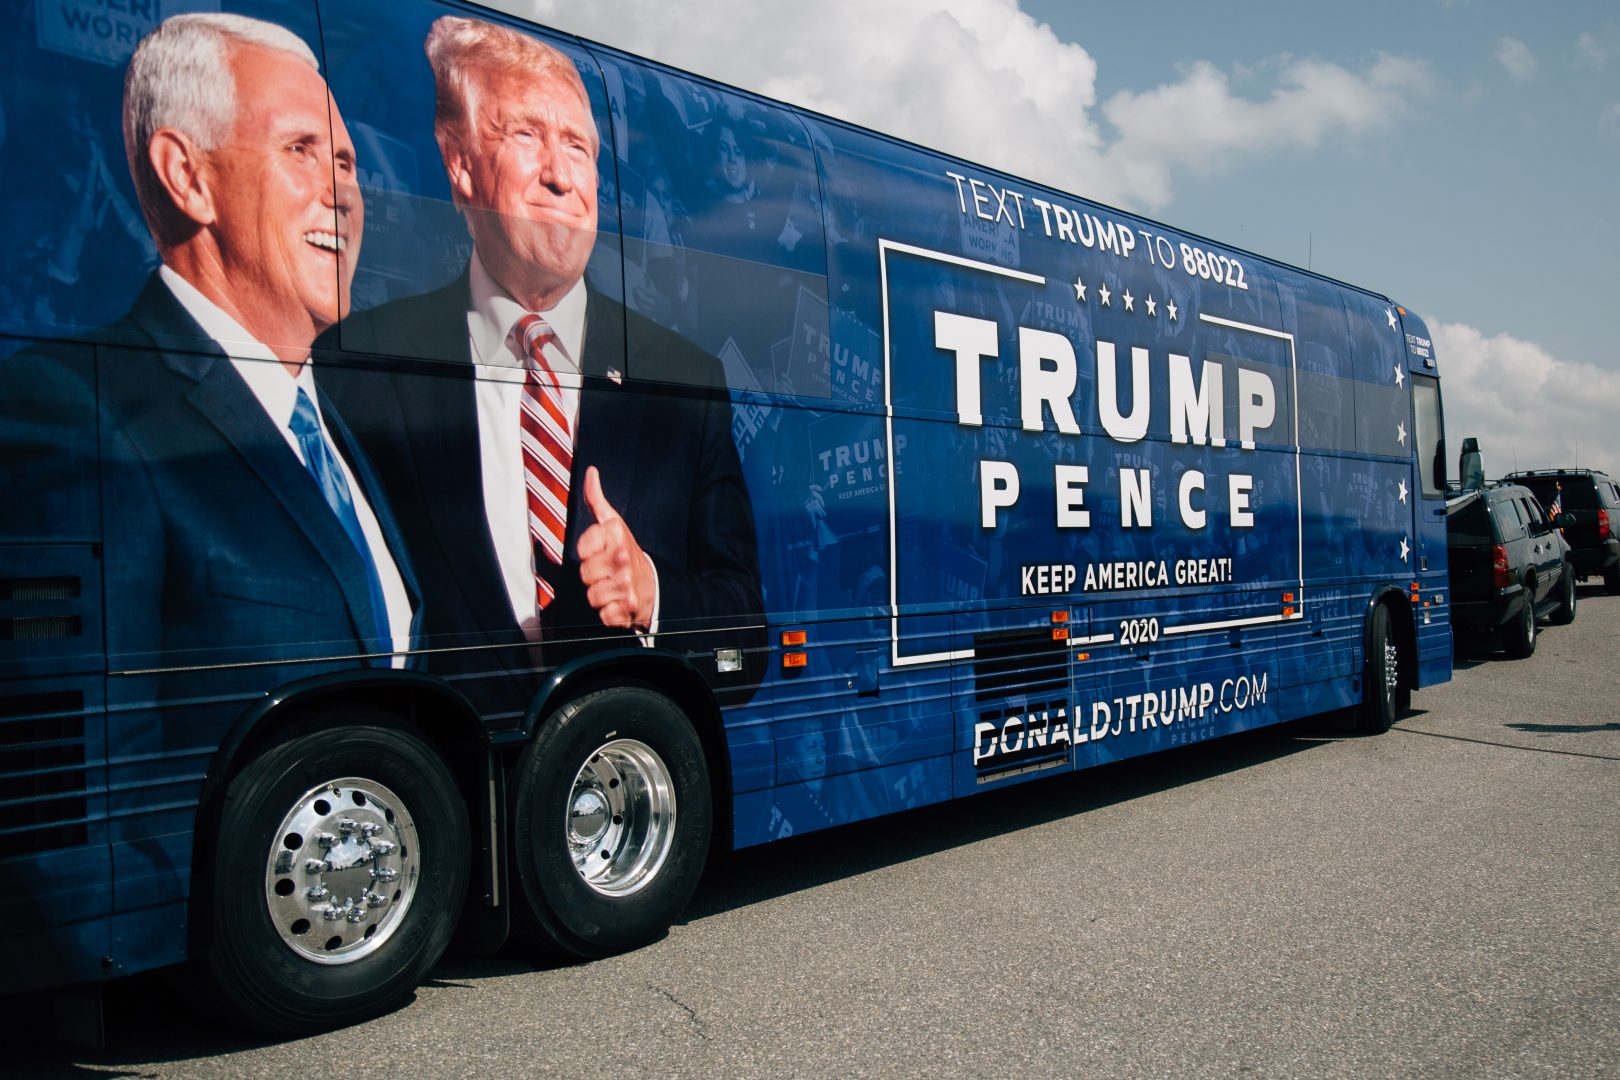 A Trump-Pence 2020 campaign bus parked at the Lancaster airport on July 9, 2020. Vice President Mike Pence flew into Lancaster for a fundraiser in Manheim, then traveled by bus for appearances in Chester County and Philadelphia.